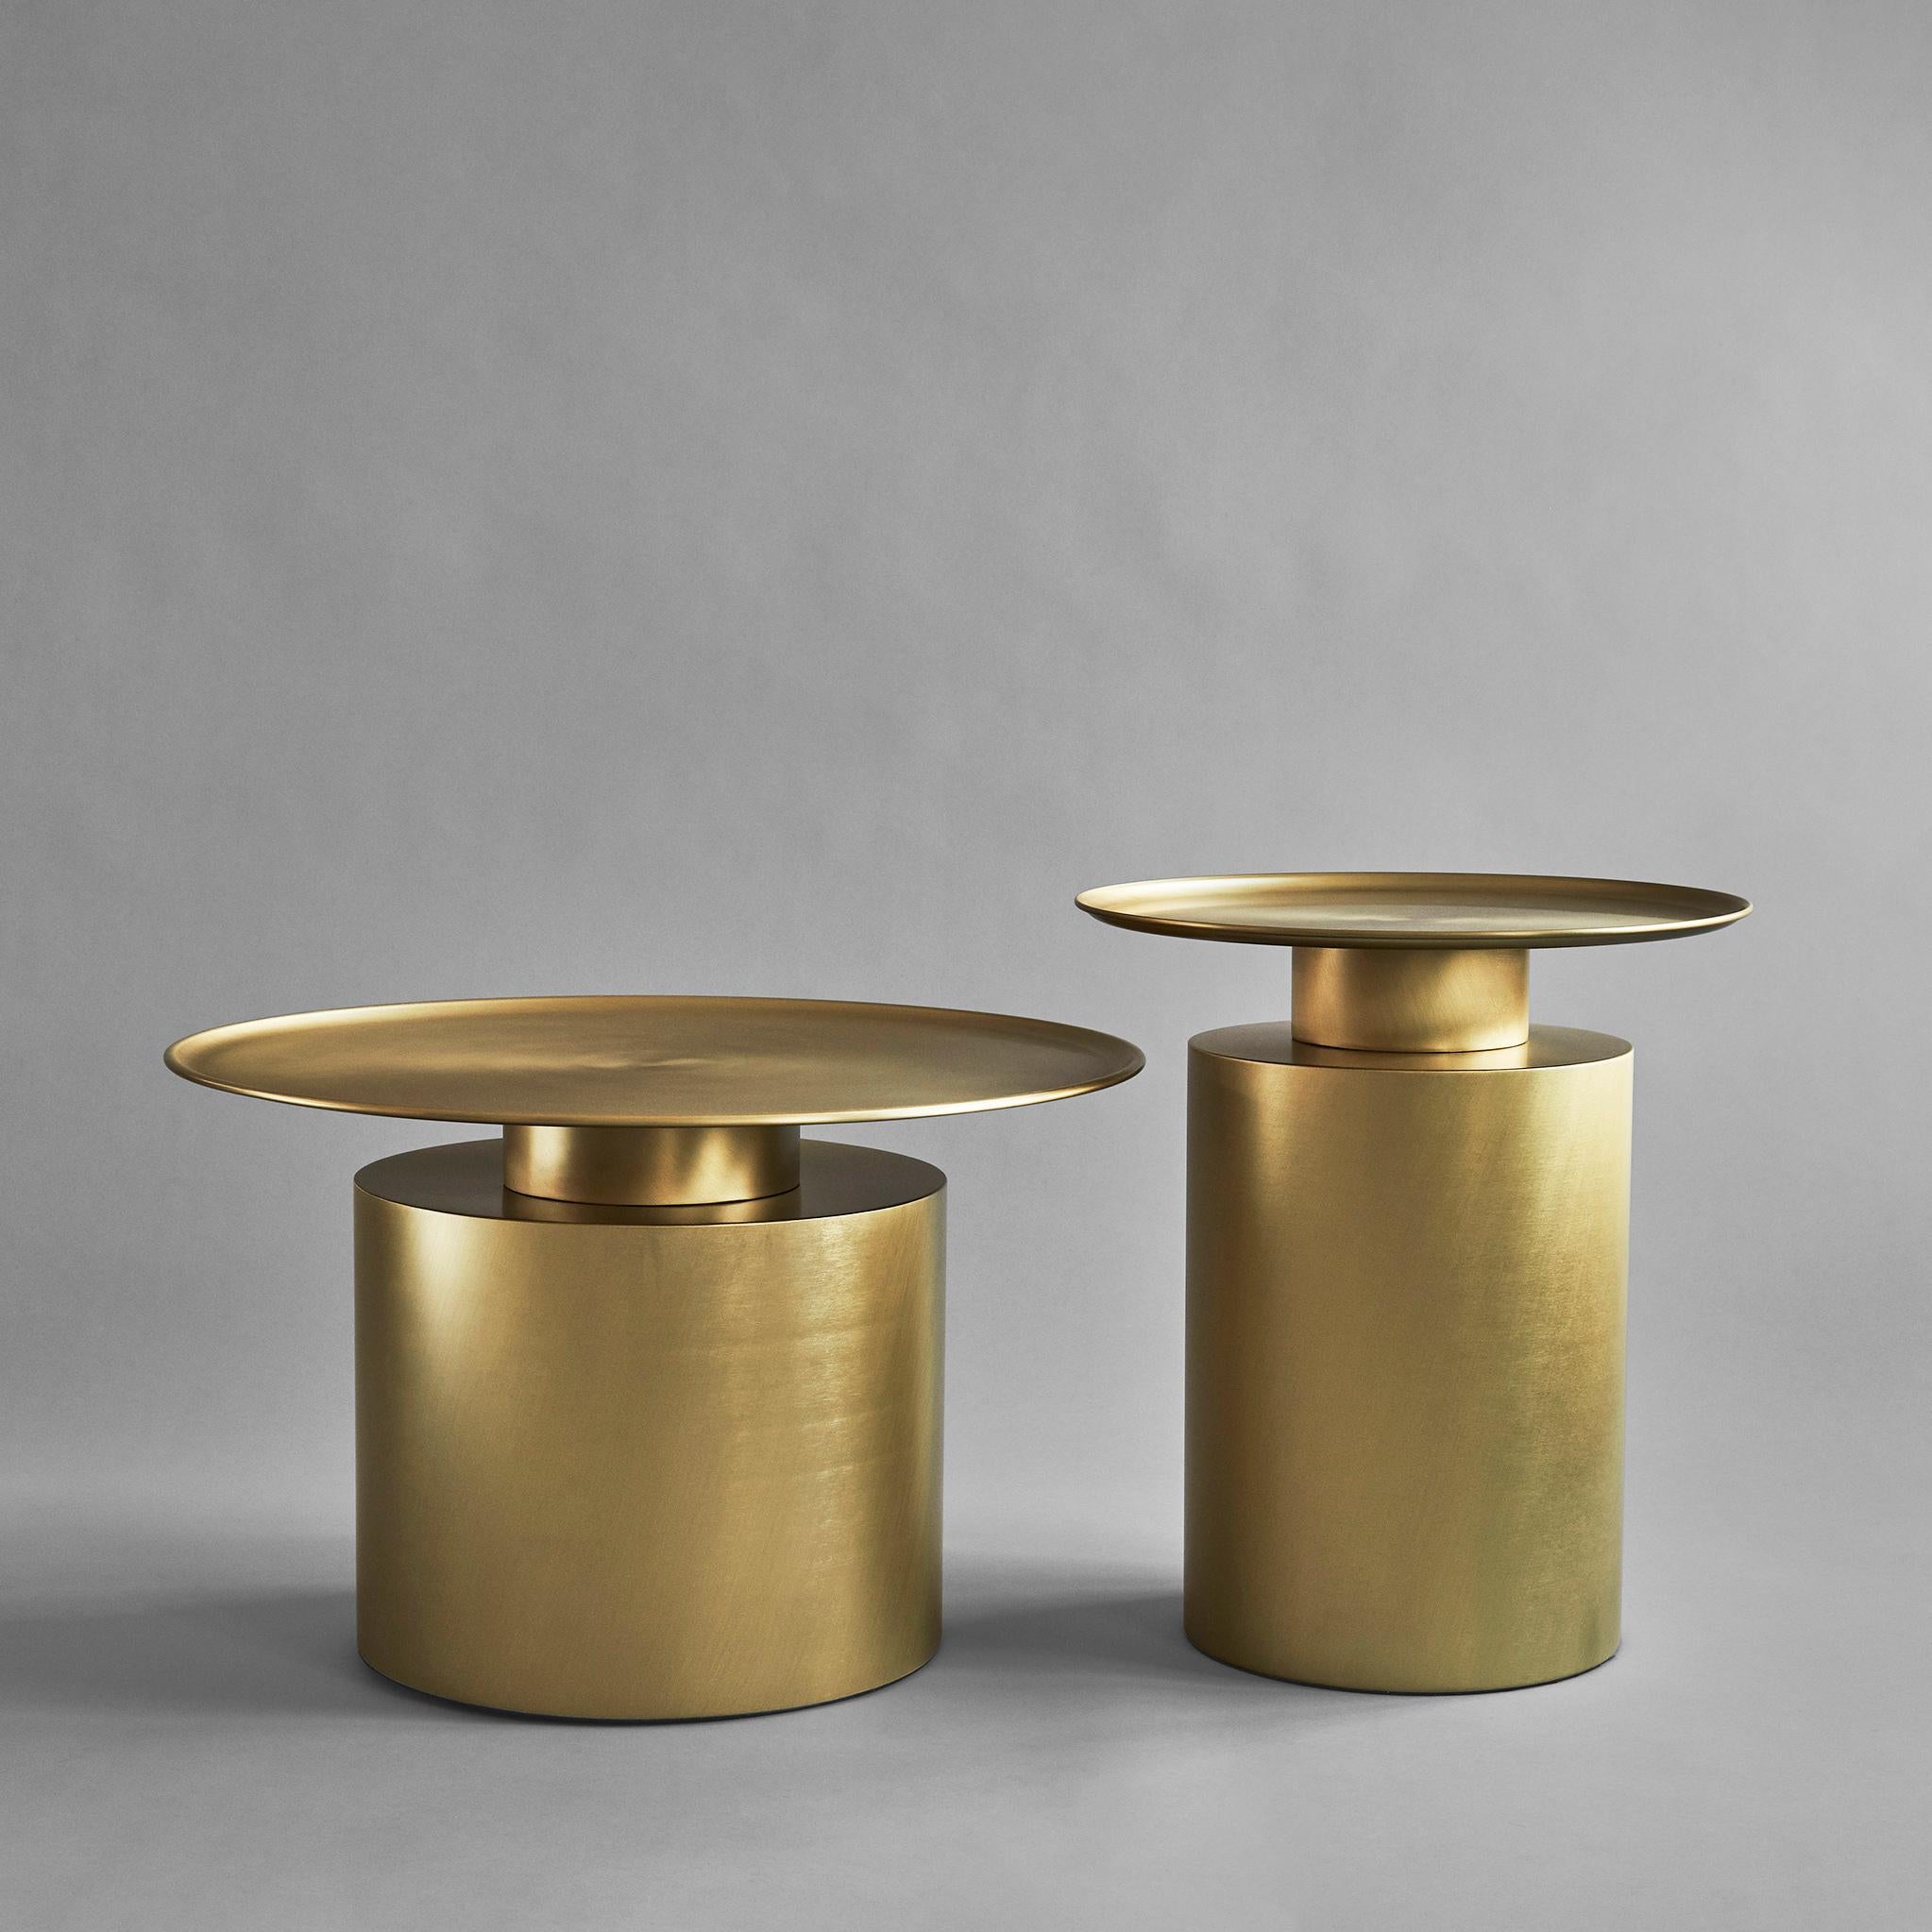 Brass Pillar Table Tall by 101 Copenhagen
Designed by Kristian Sofus Hansen & Tommy Hyldahl
Dimensions: L50 / W45 /H45 CM
Materials: Plated Metal

Pillar is inspired by the rich lustrous use of material in the 1930´s Art Deco movement. The coffee